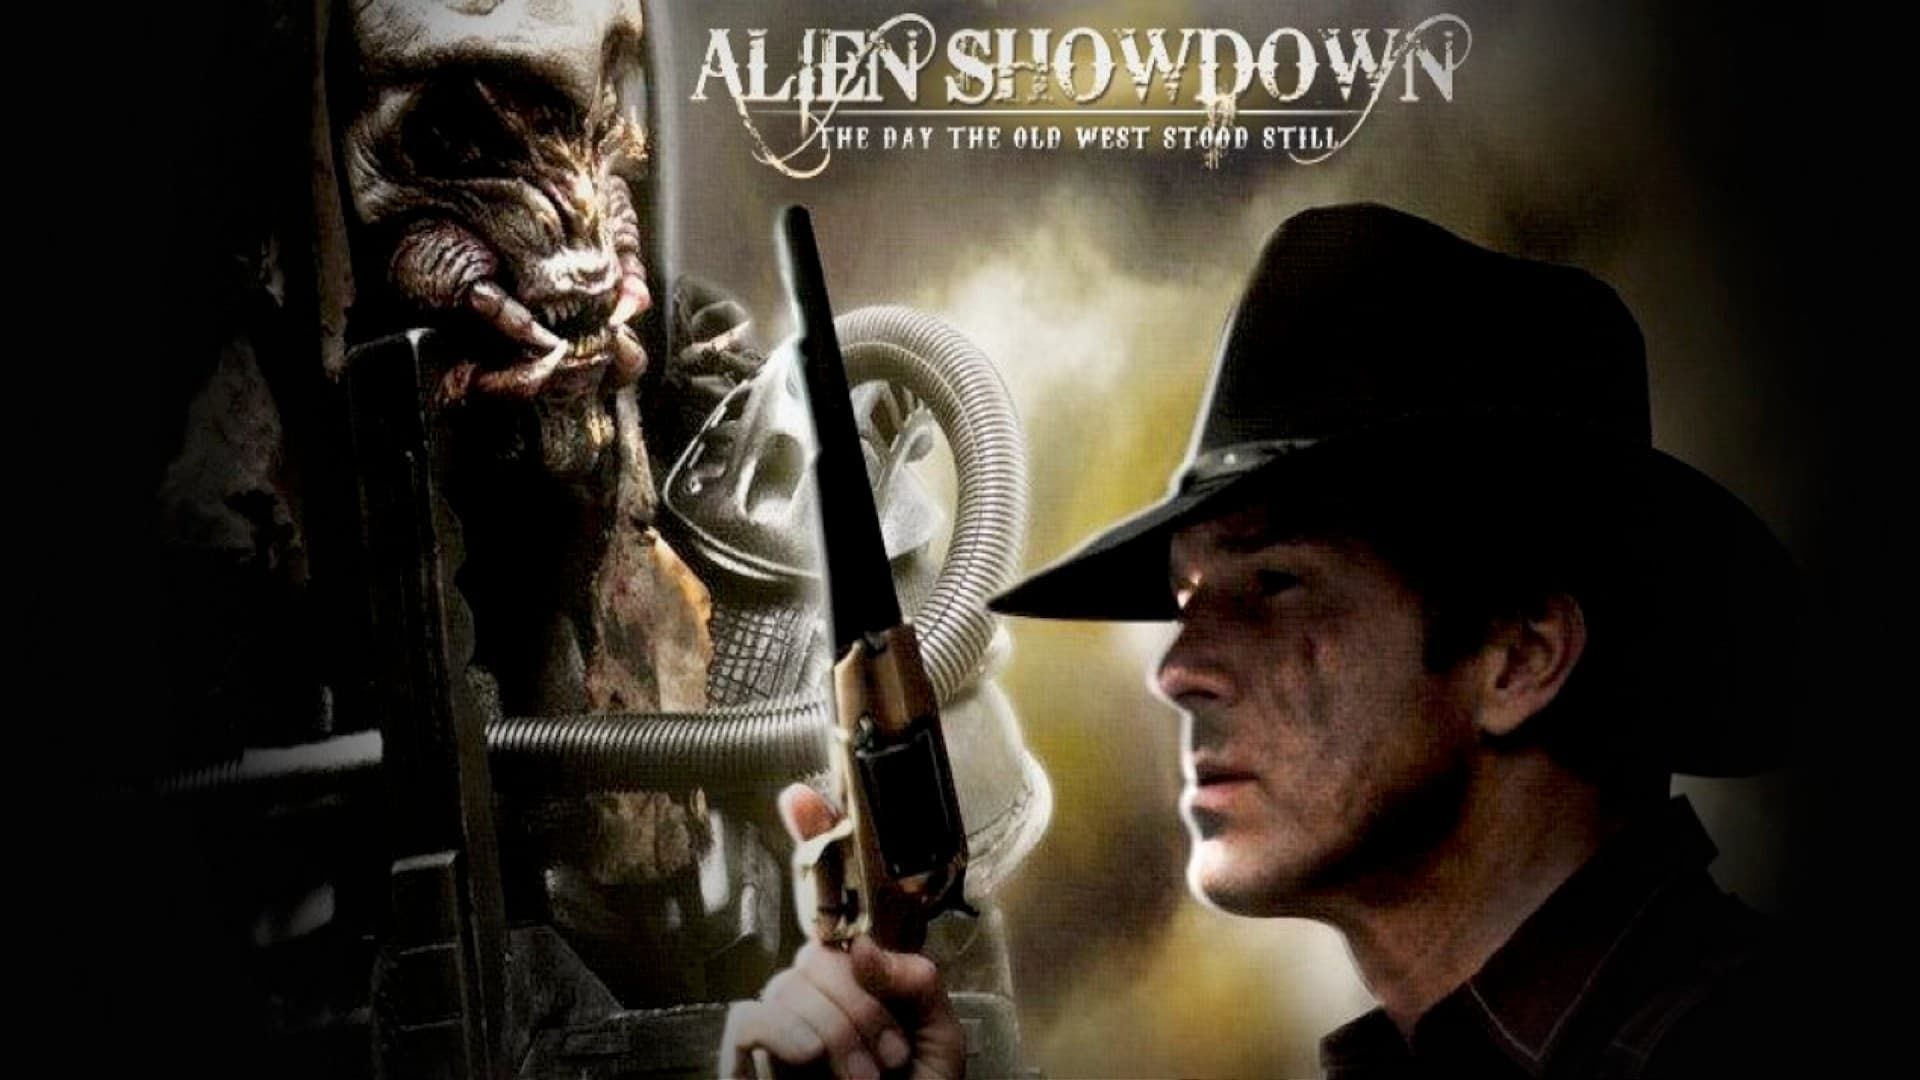 Alien Showdown: The Day the Old West Stood Still background